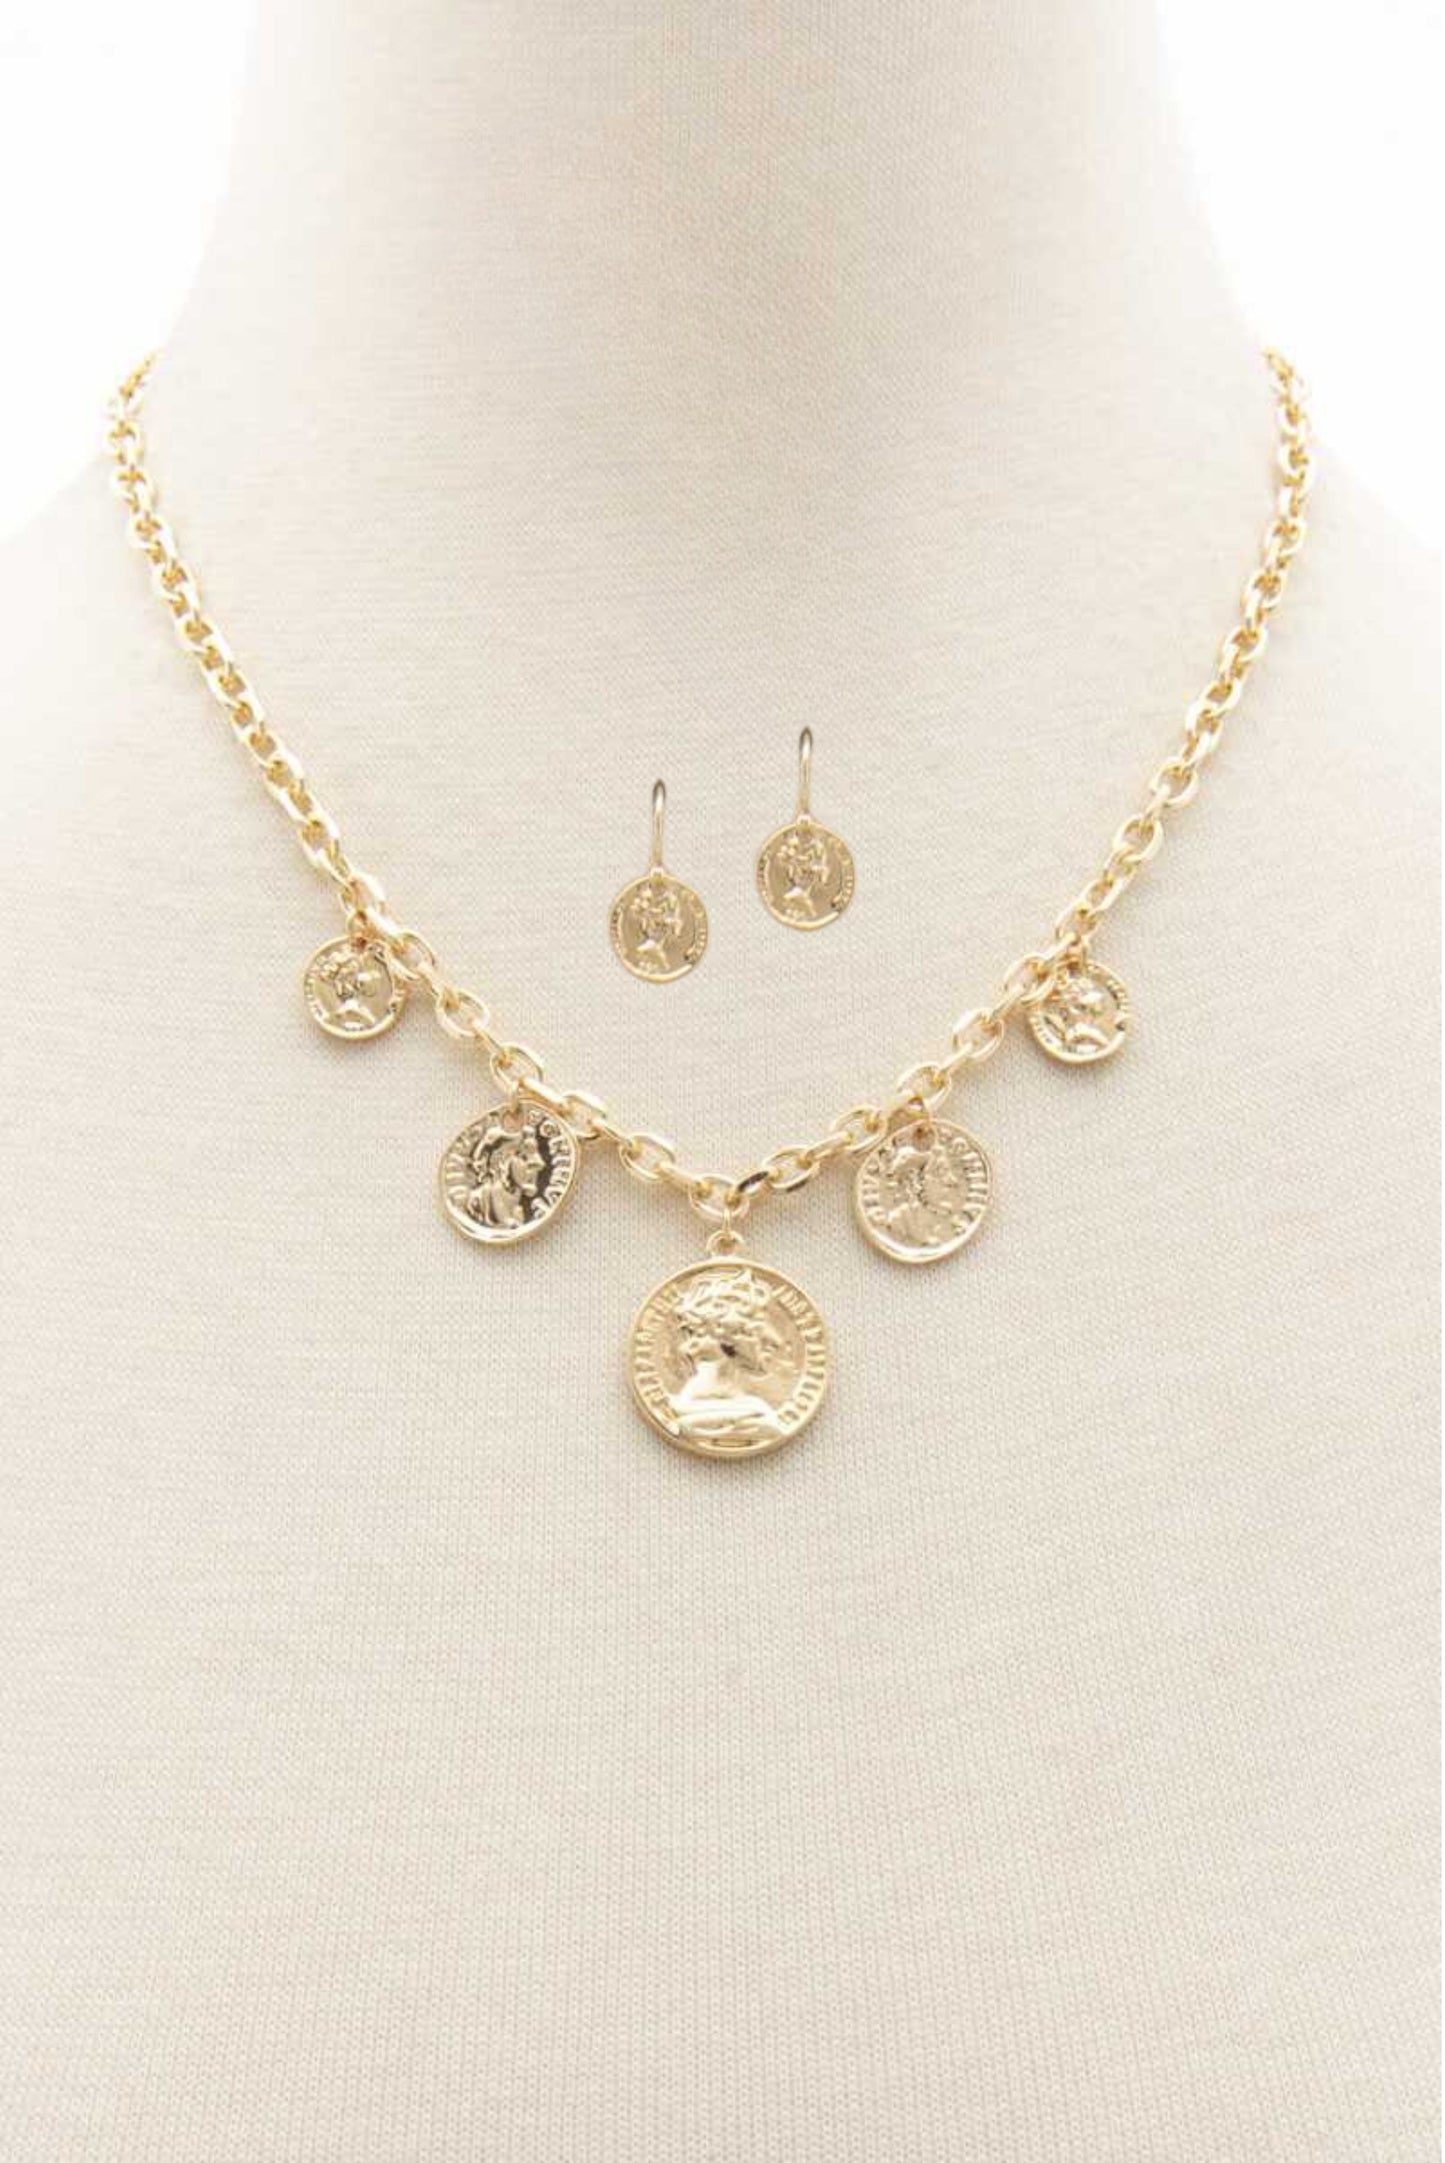 Single Tier Coin Necklace With Earrings